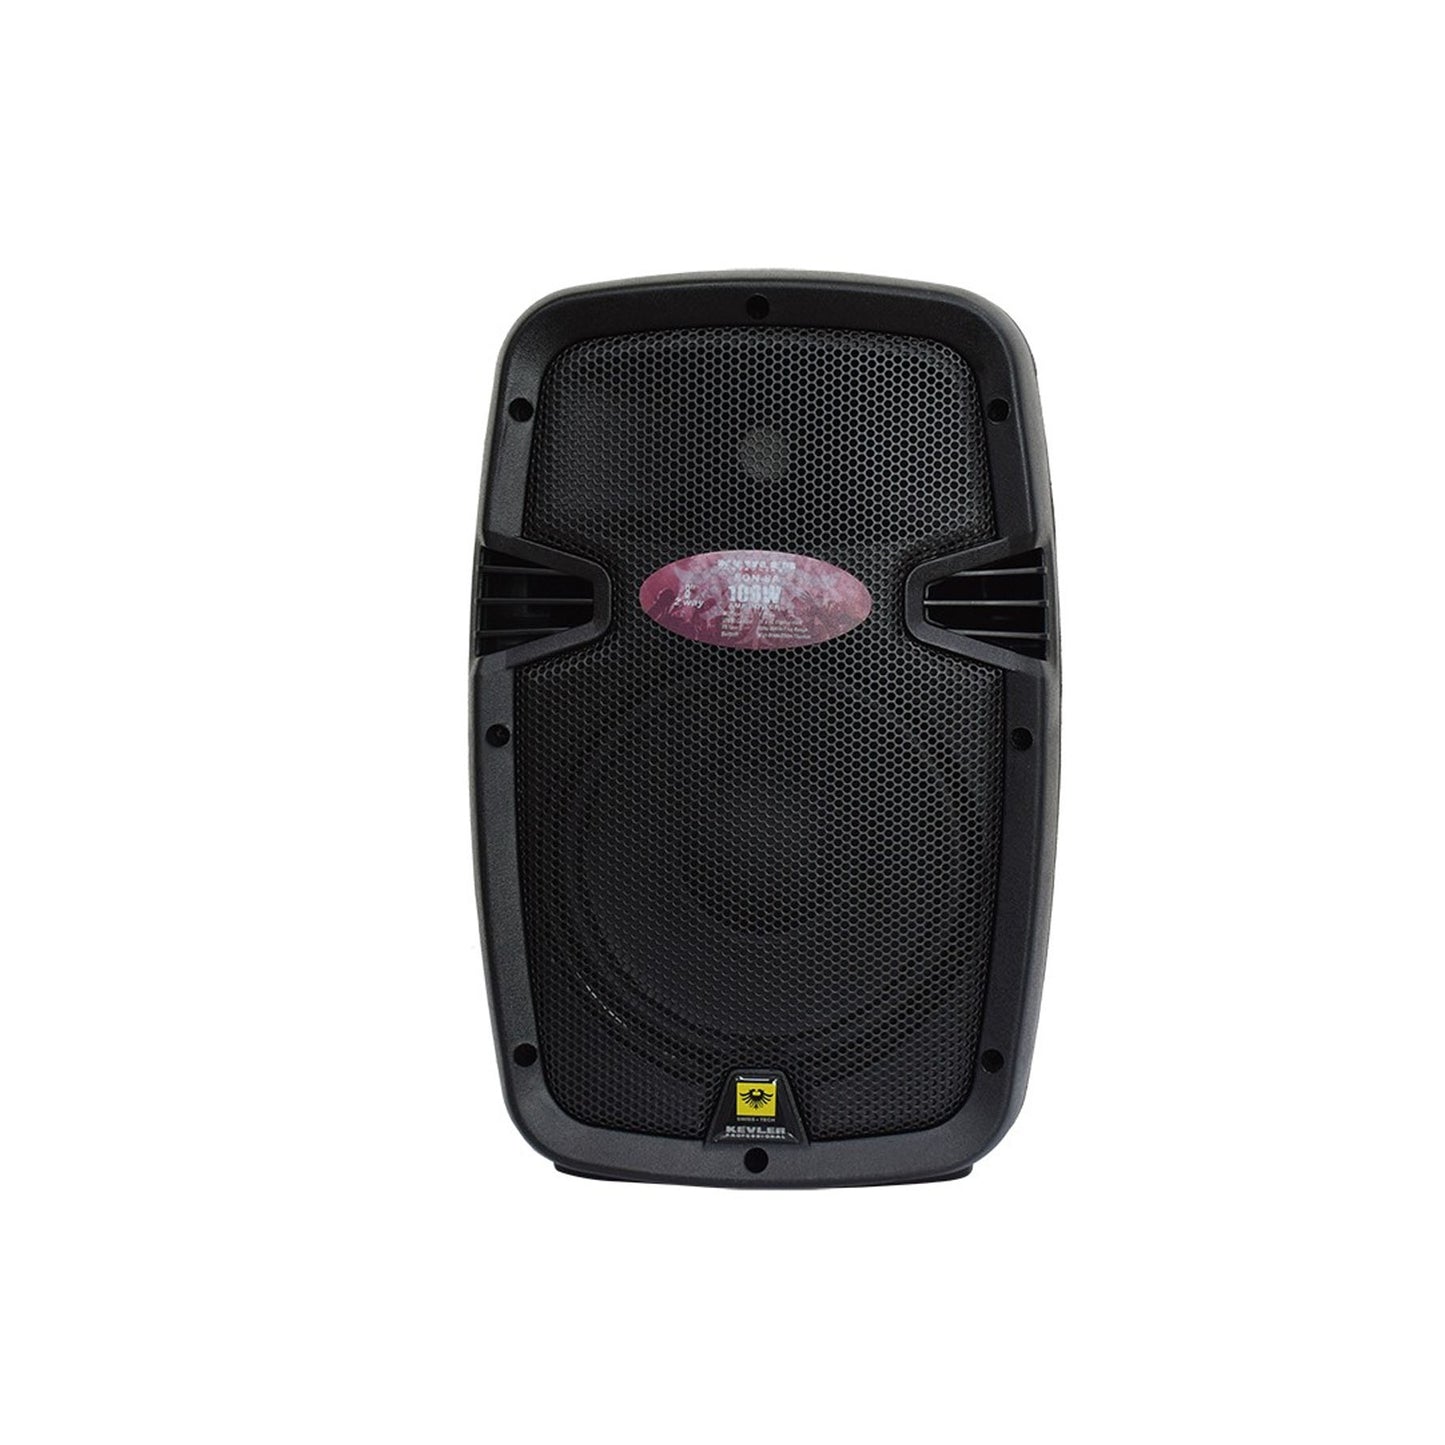 KEVLER EON-8A 8" 200W 2-way Full Range Active Loud Speaker (Pair) with LCD Display and Class D Amplifier, Built-In USB Port / FM / Bluetooth Function, RCA Input and 3 Mic Line I/O